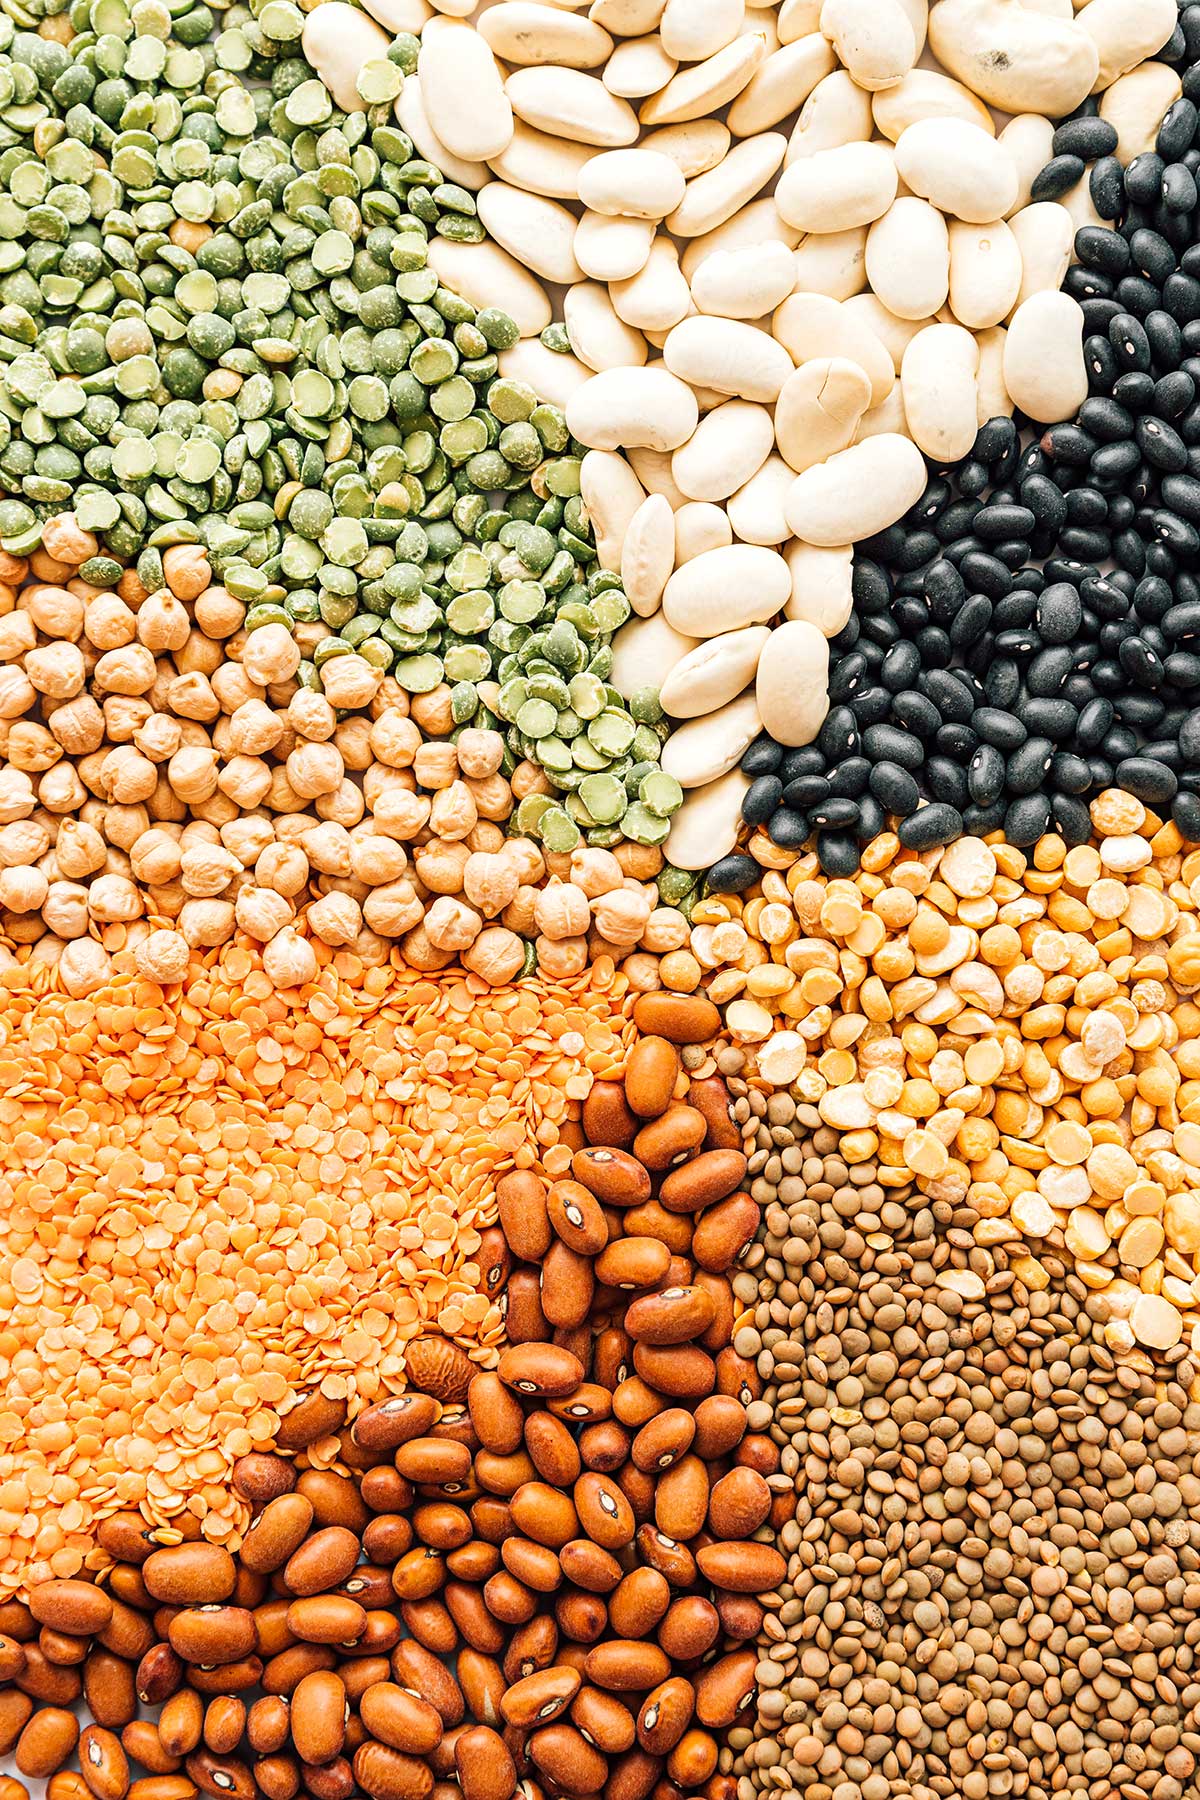 Rainbow of different types of dried legumes